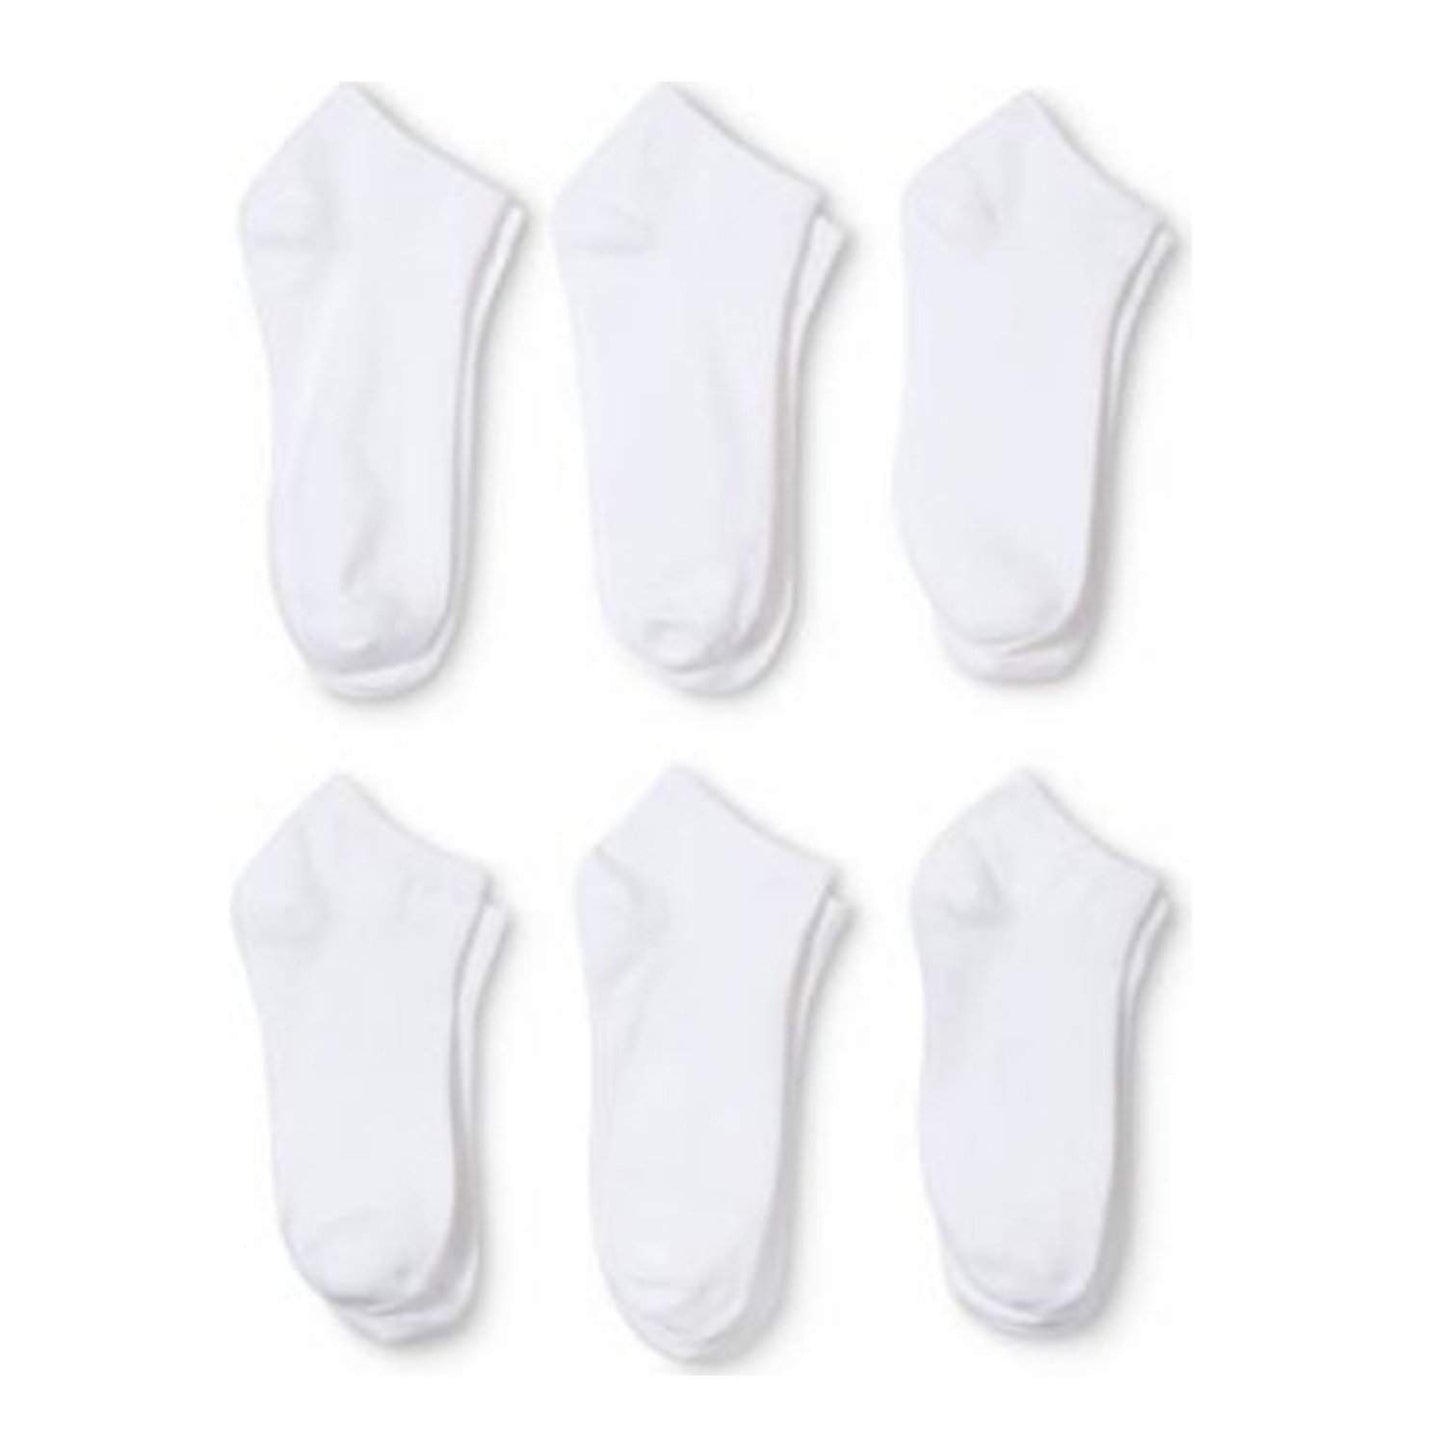 12 Pairs Men's Ankle No Show Socks - Polyester and Spandex - Black or White